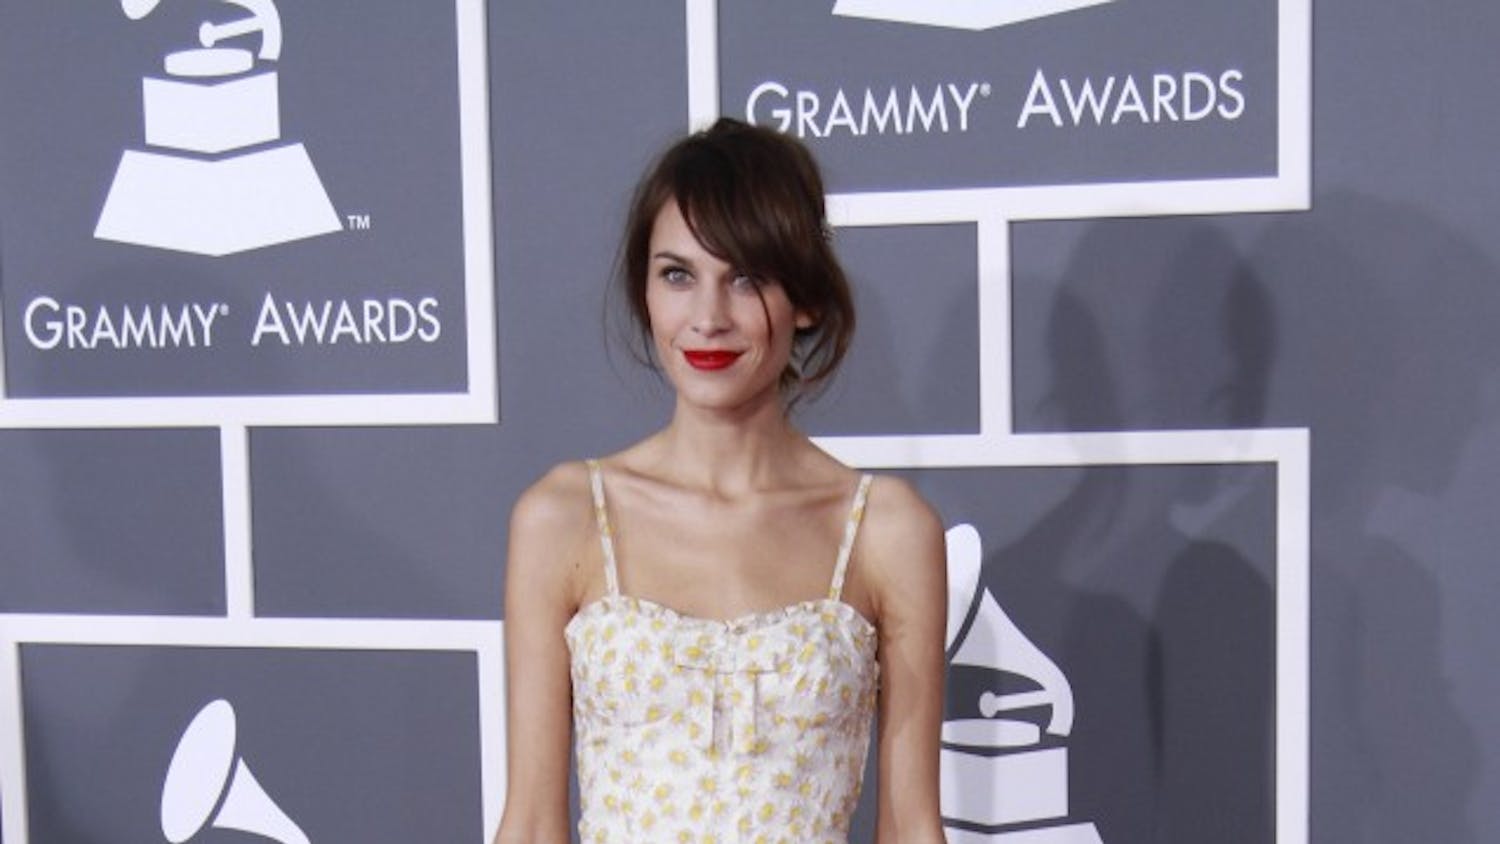 Alexa Chung arrives for the 55th Annual Grammy Awards at Staples Center in Los Angeles, California, on Sunday, February 10, 2013. (Kirk McKoy/Los Angeles Times/MCT)